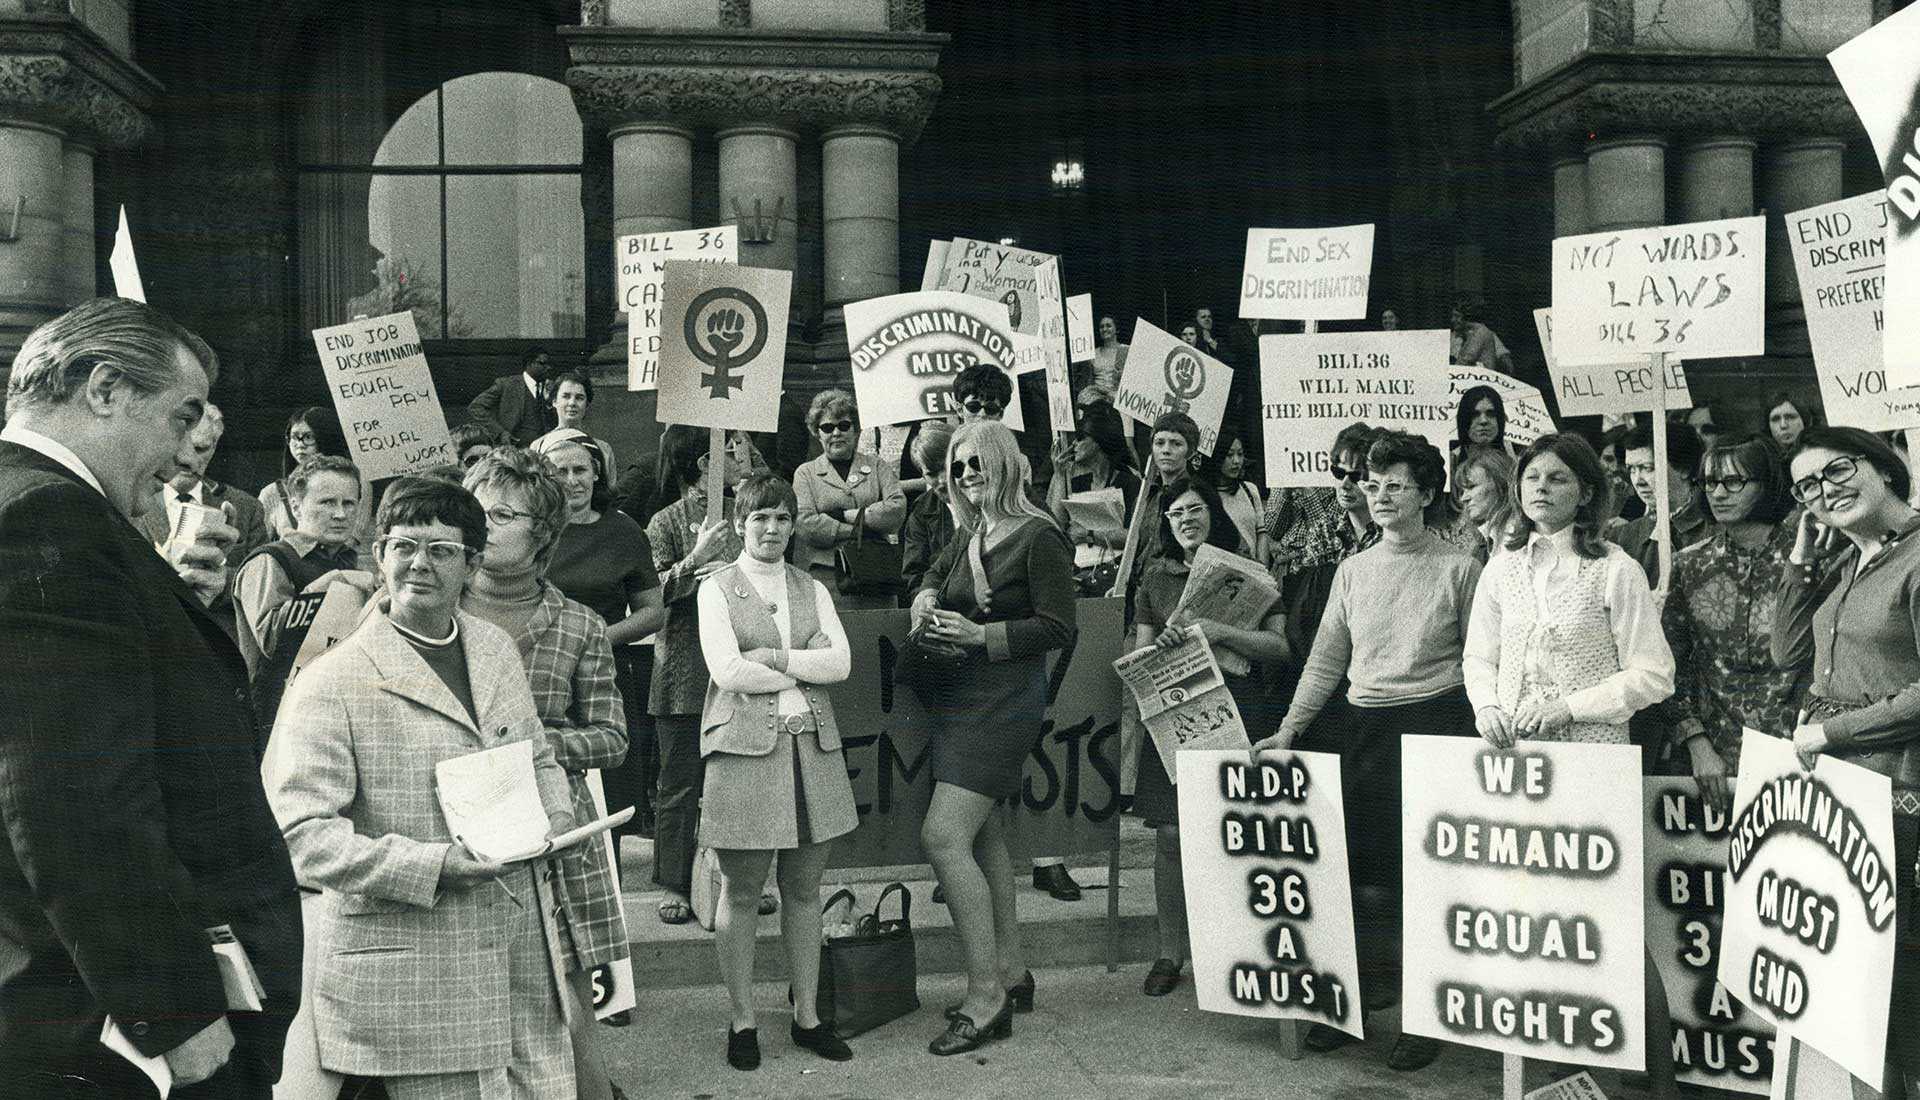 Members of the Voice of Women demonstrated at Queen’s Park in April 1970, asking support for a bill to ensure that women get equal pay for equal work. (Photo: Dick Darrell/Toronto Star via Getty Images)